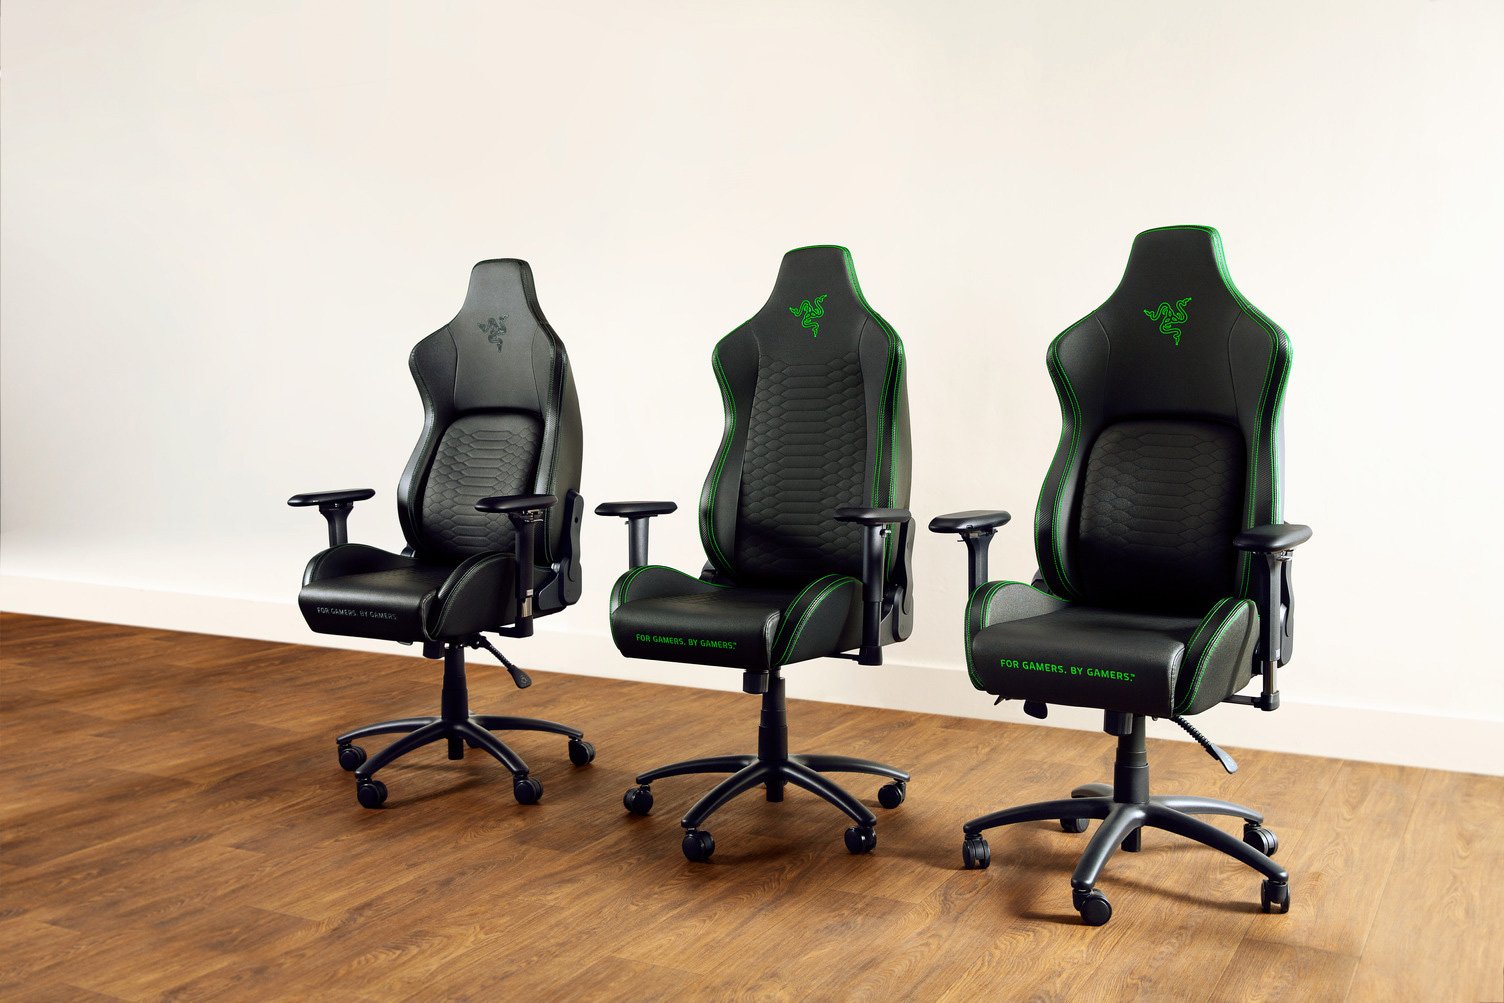 Simple Razer Gaming Chair Review for Simple Design